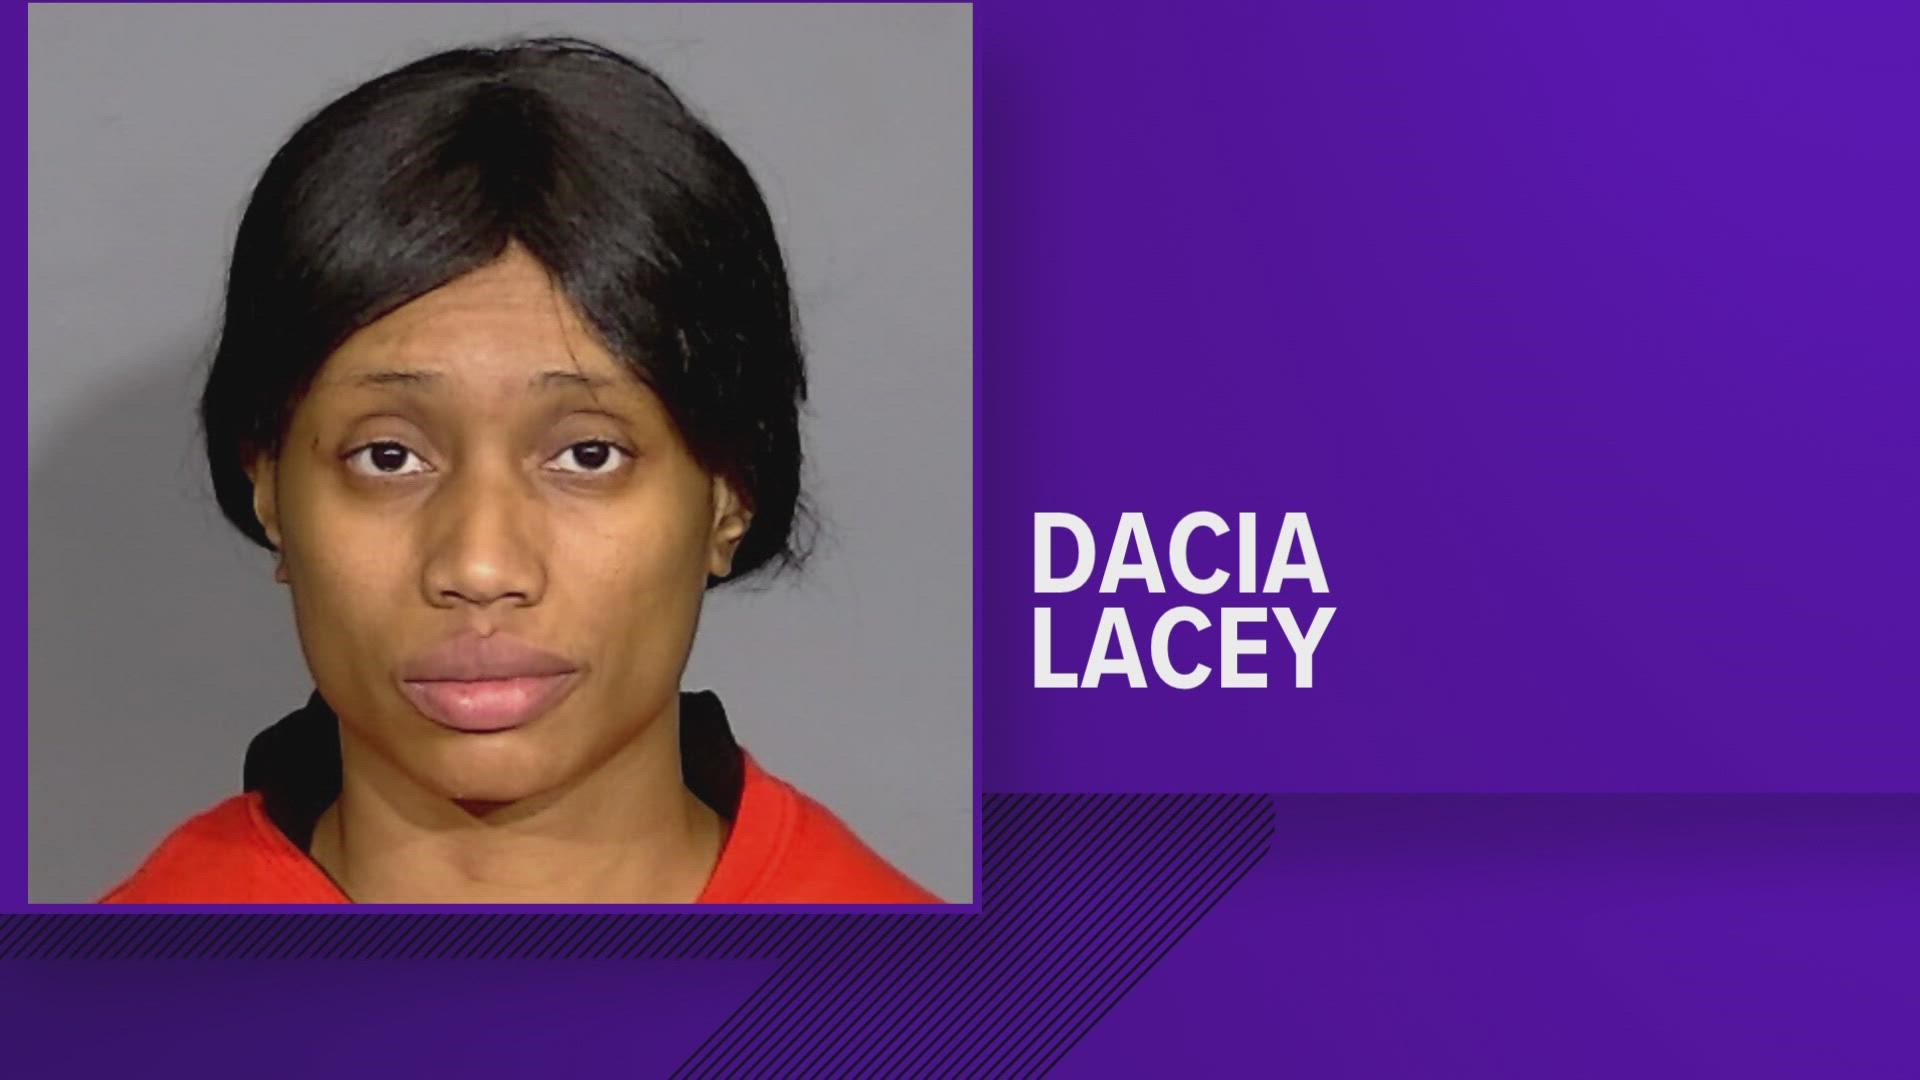 Dacia Lacy is charged with Neglect of a dependent resulting in death.